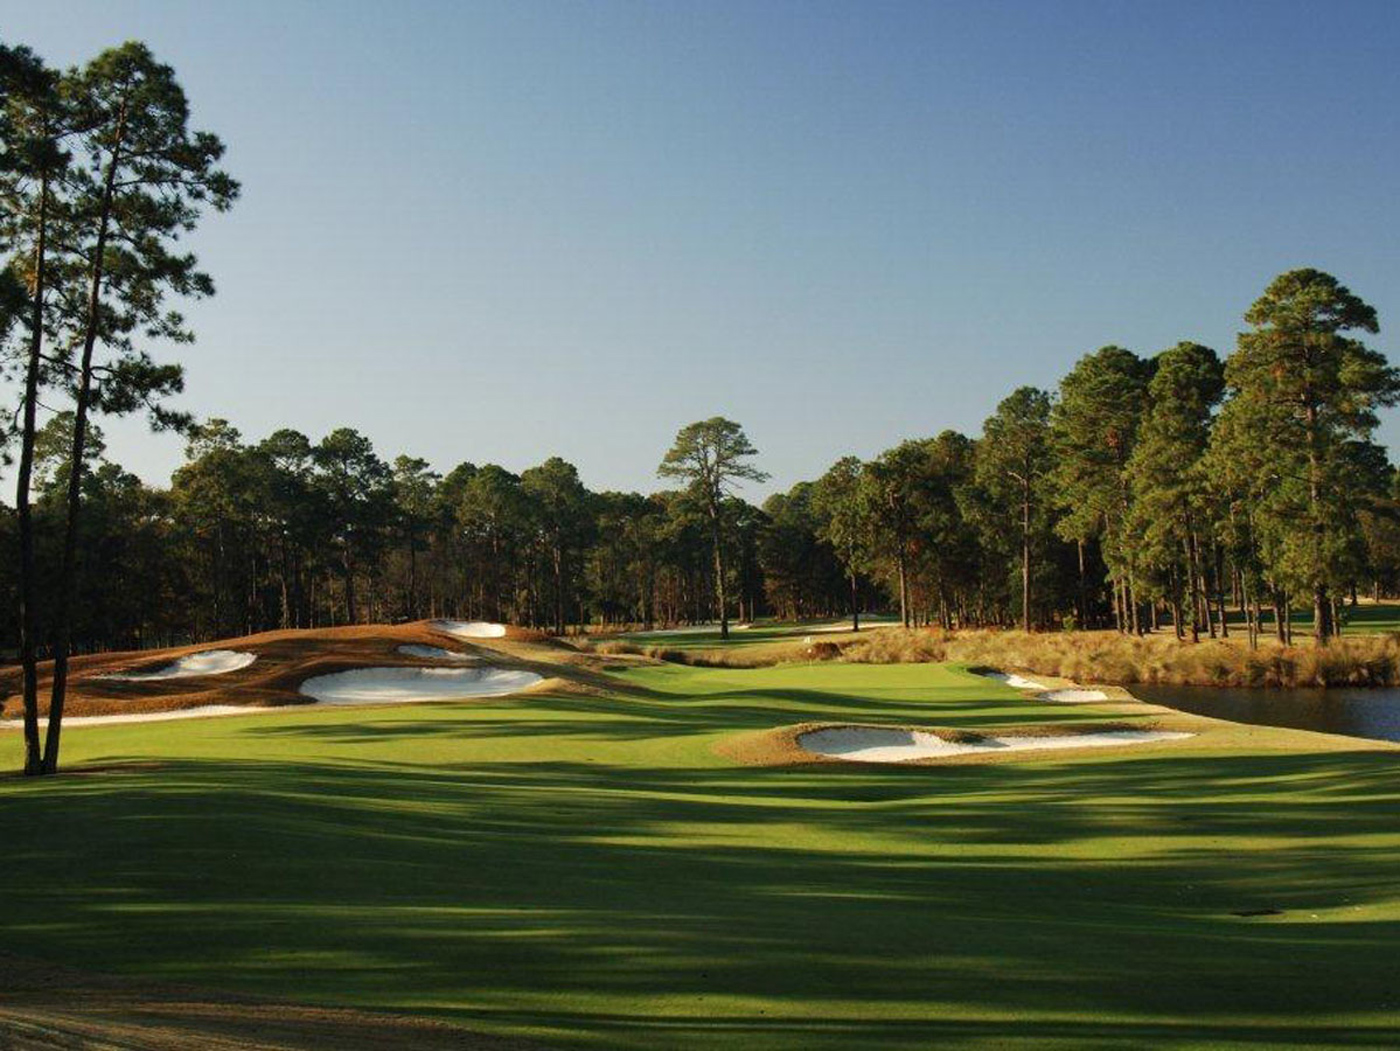 Southern Living at Hilton Head National Golf Club in Bluffton, SC, designed by Bobby Weed and Gary Player